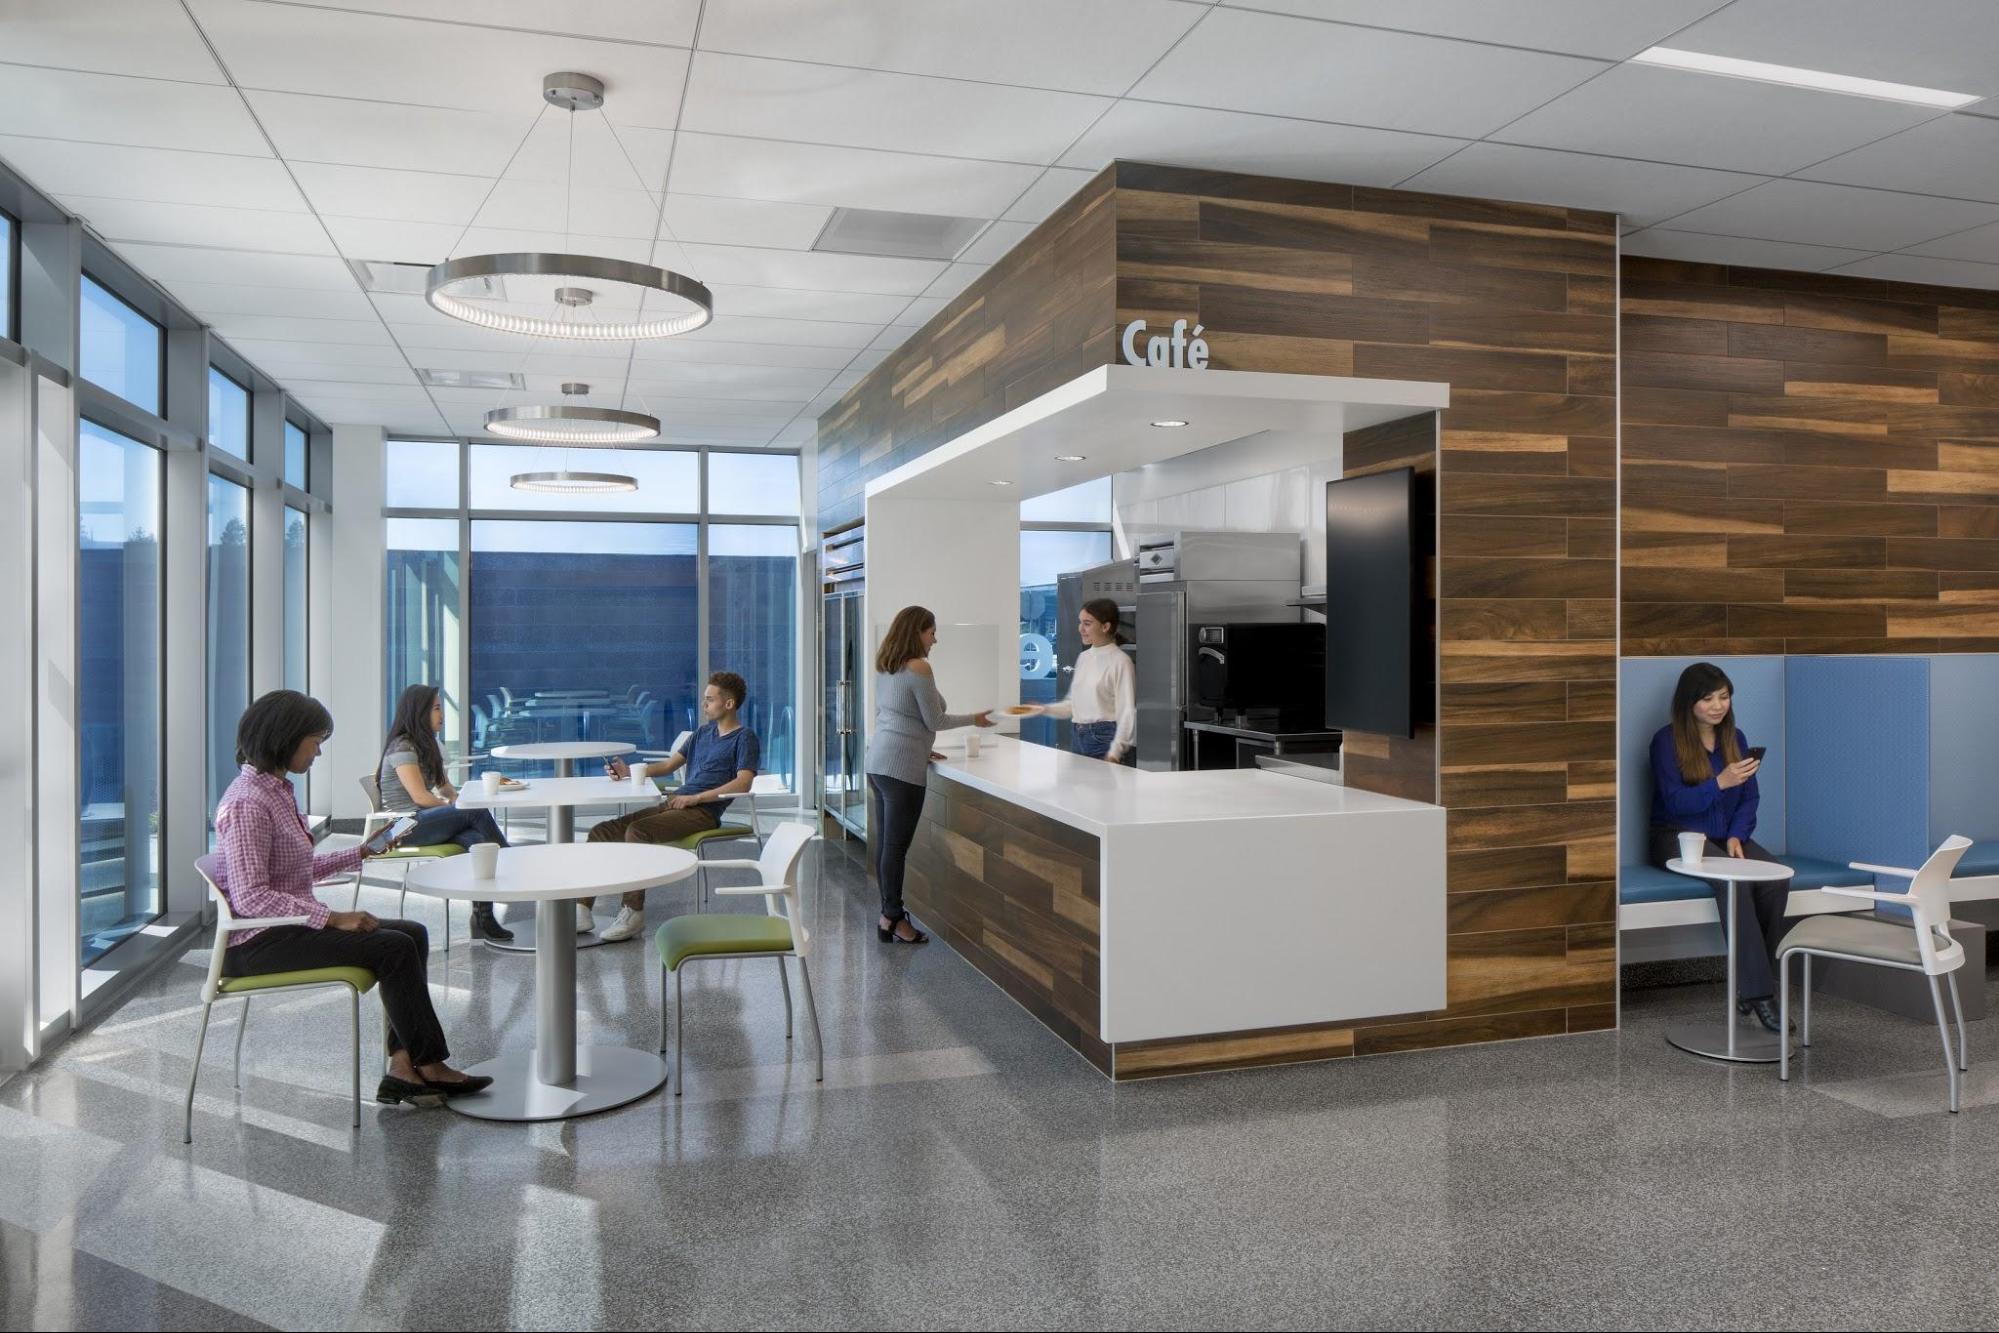 Healthcare architecture planning streamlines the waiting process.